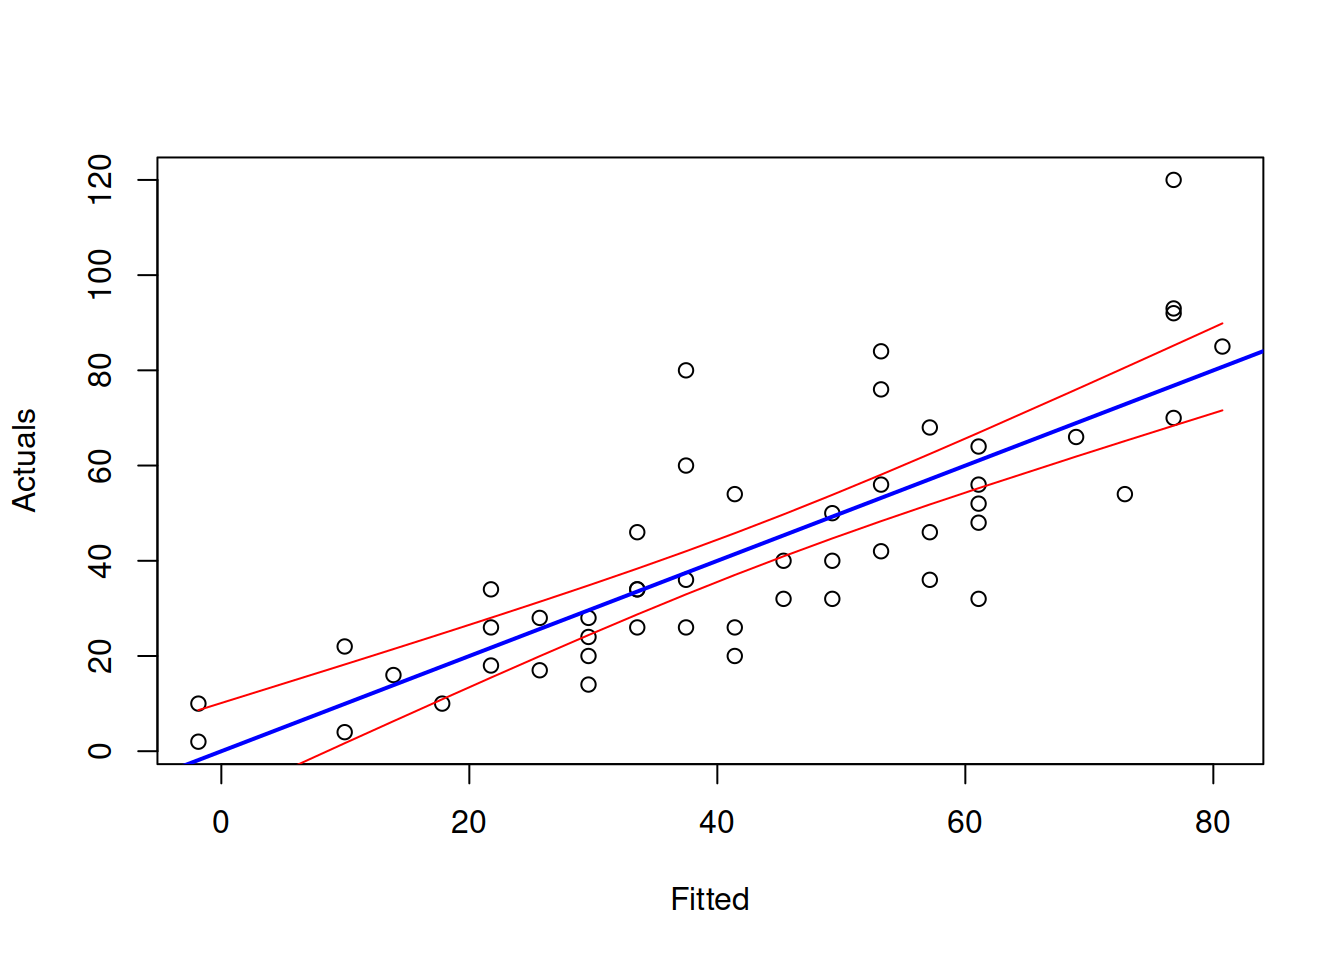 Actuals vs Fitted and confidence interval for the stopping distance model.